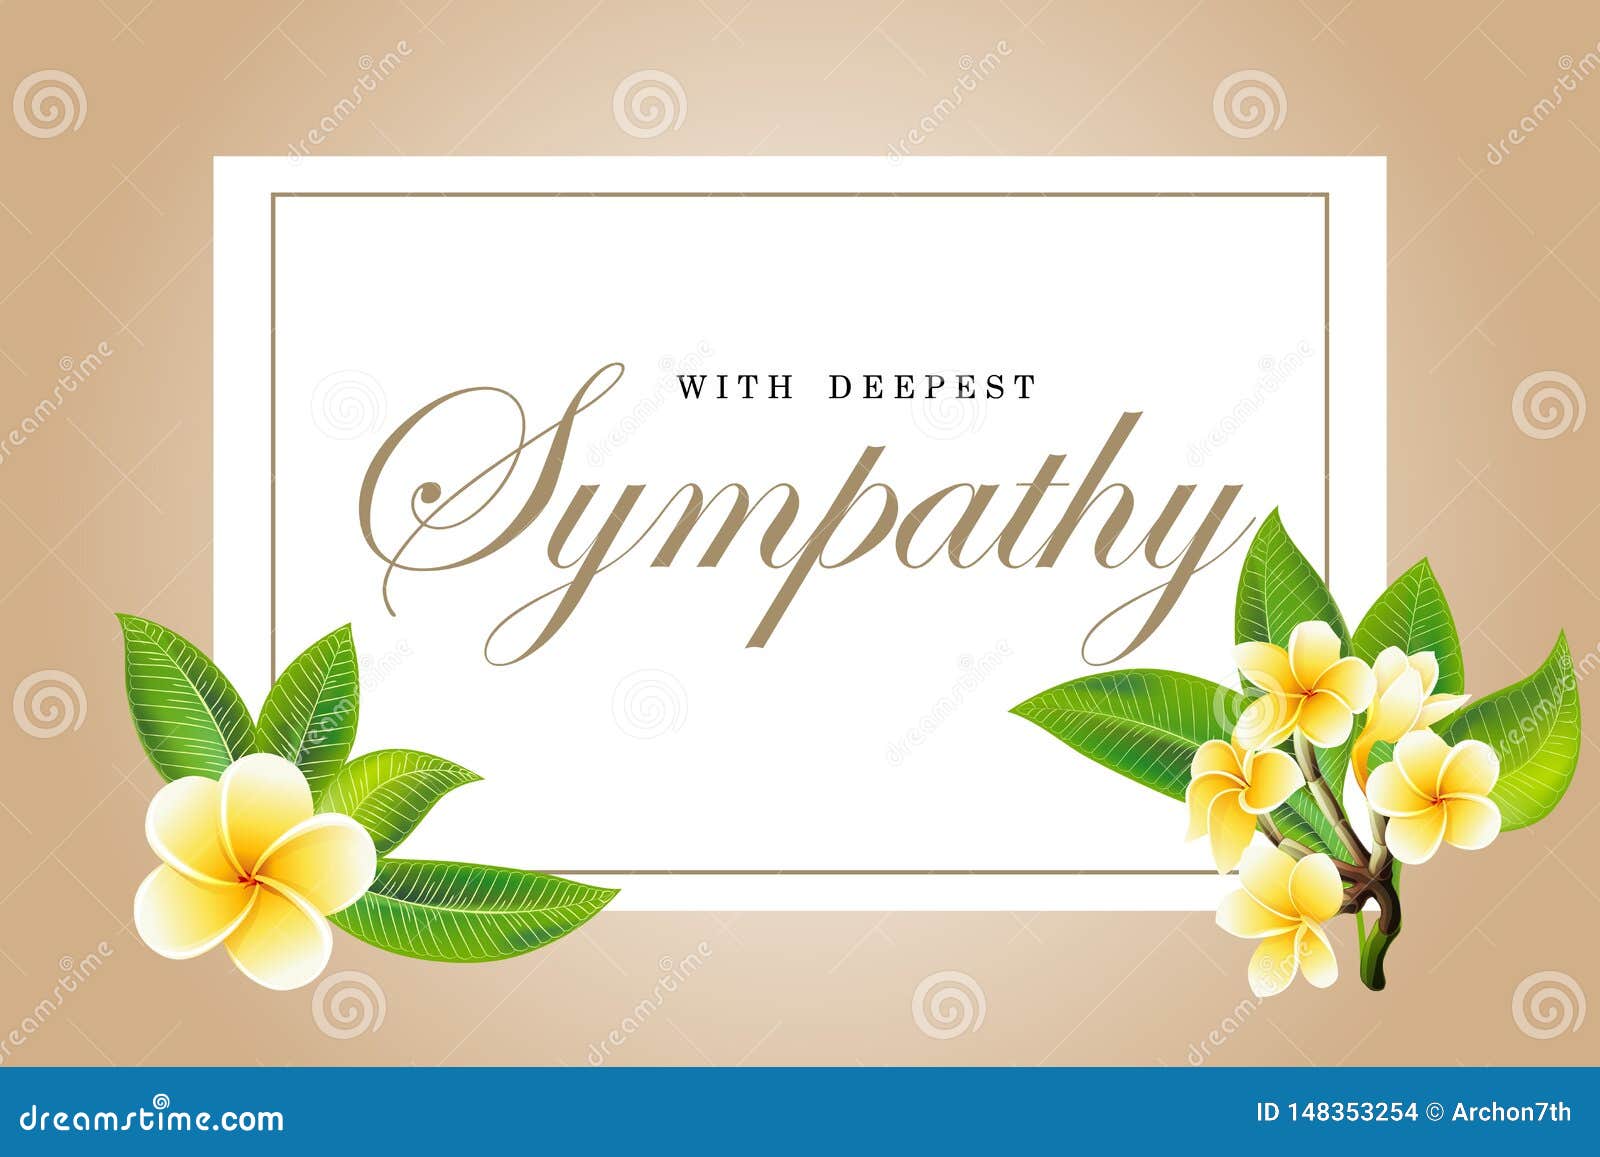 Card Condolences Stock Illustrations – 23 Card Condolences Stock With Sorry For Your Loss Card Template